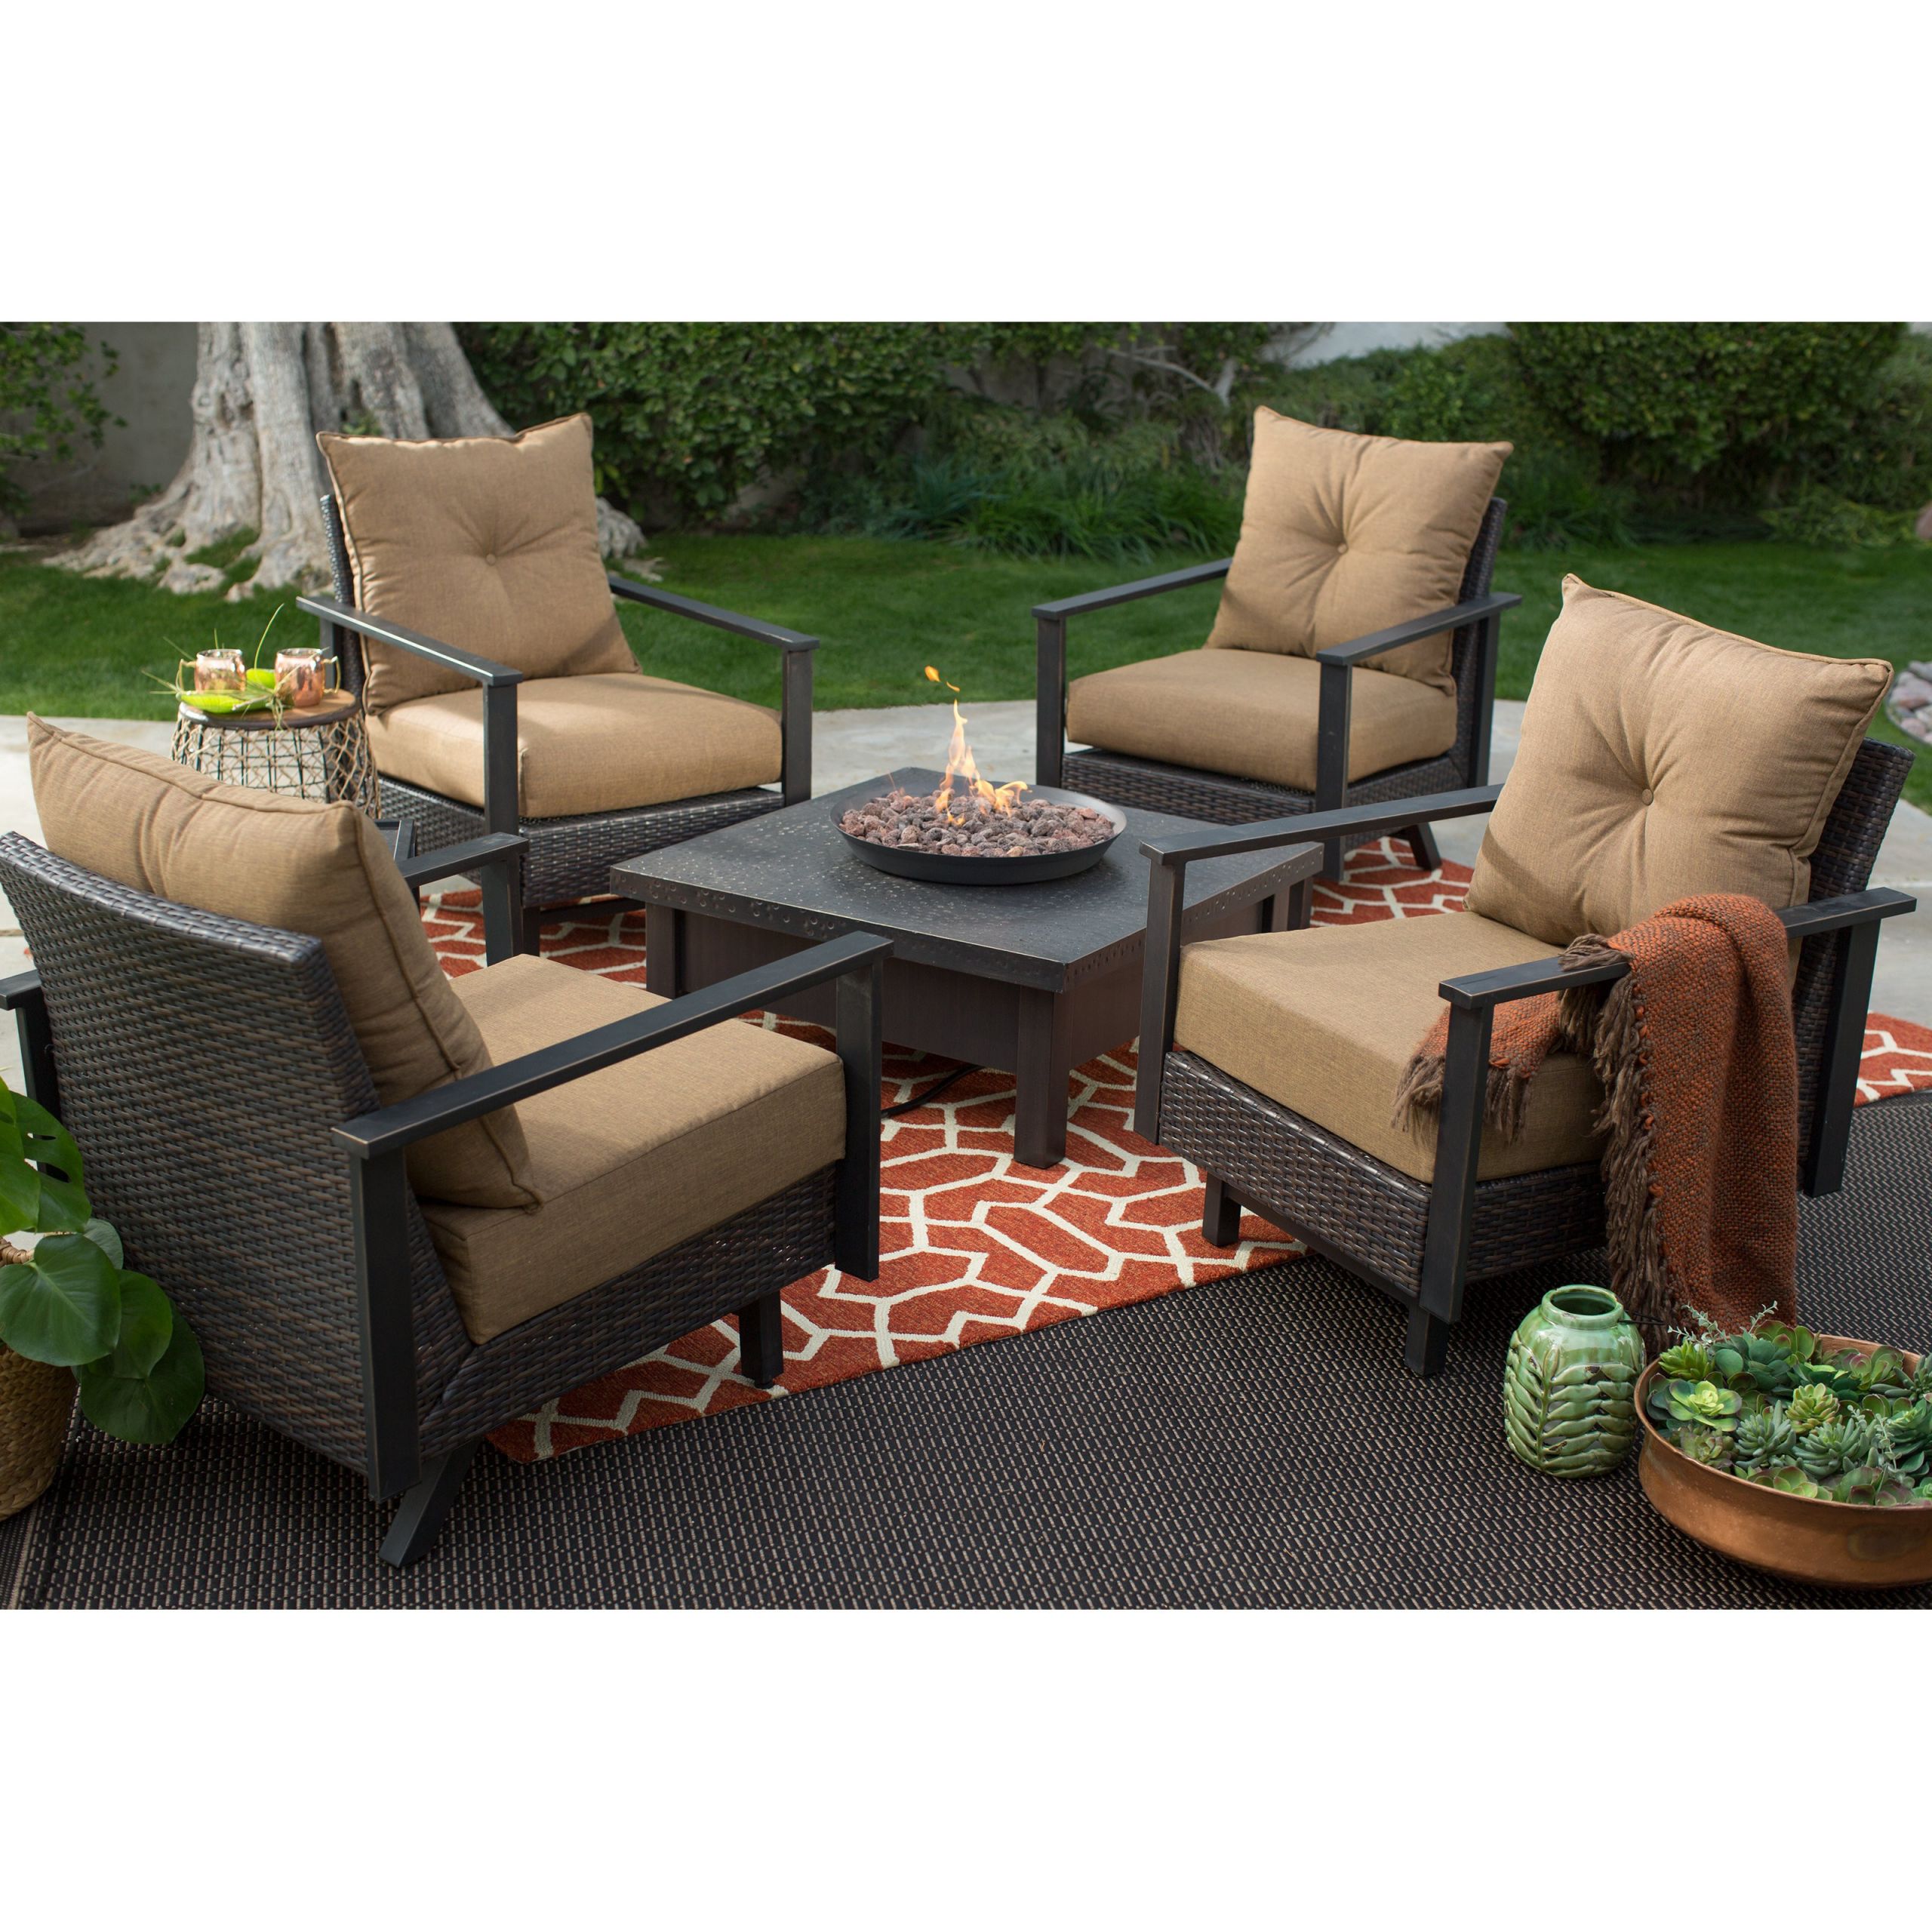 Patio Set With Fire Pit
 Belham Living Livingston All Weather Wicker 6 Piece Fire